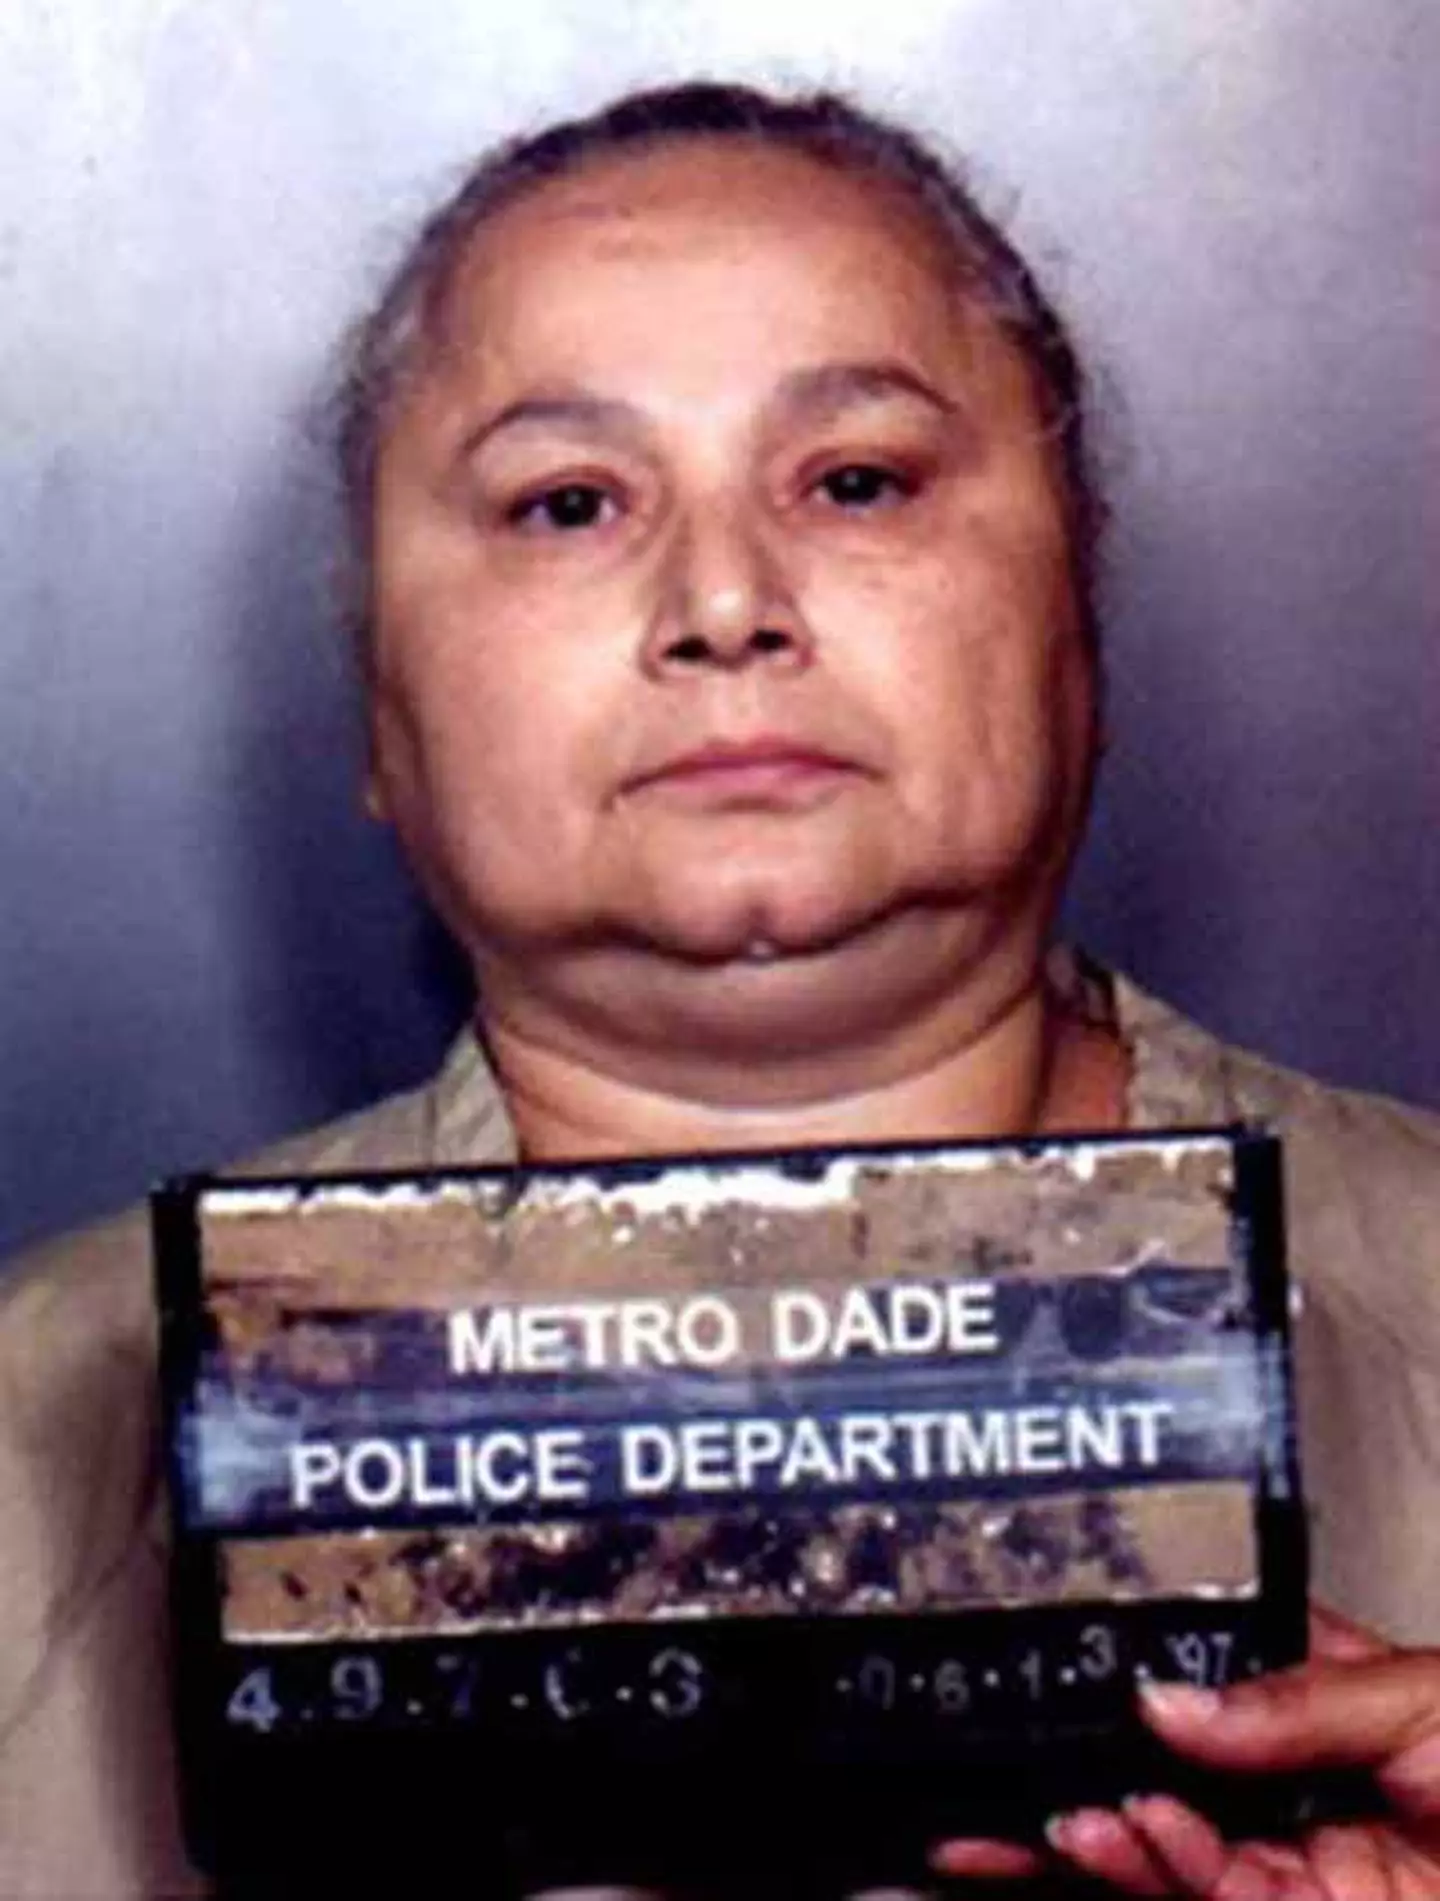 The series follows the story of Griselda Blanco.